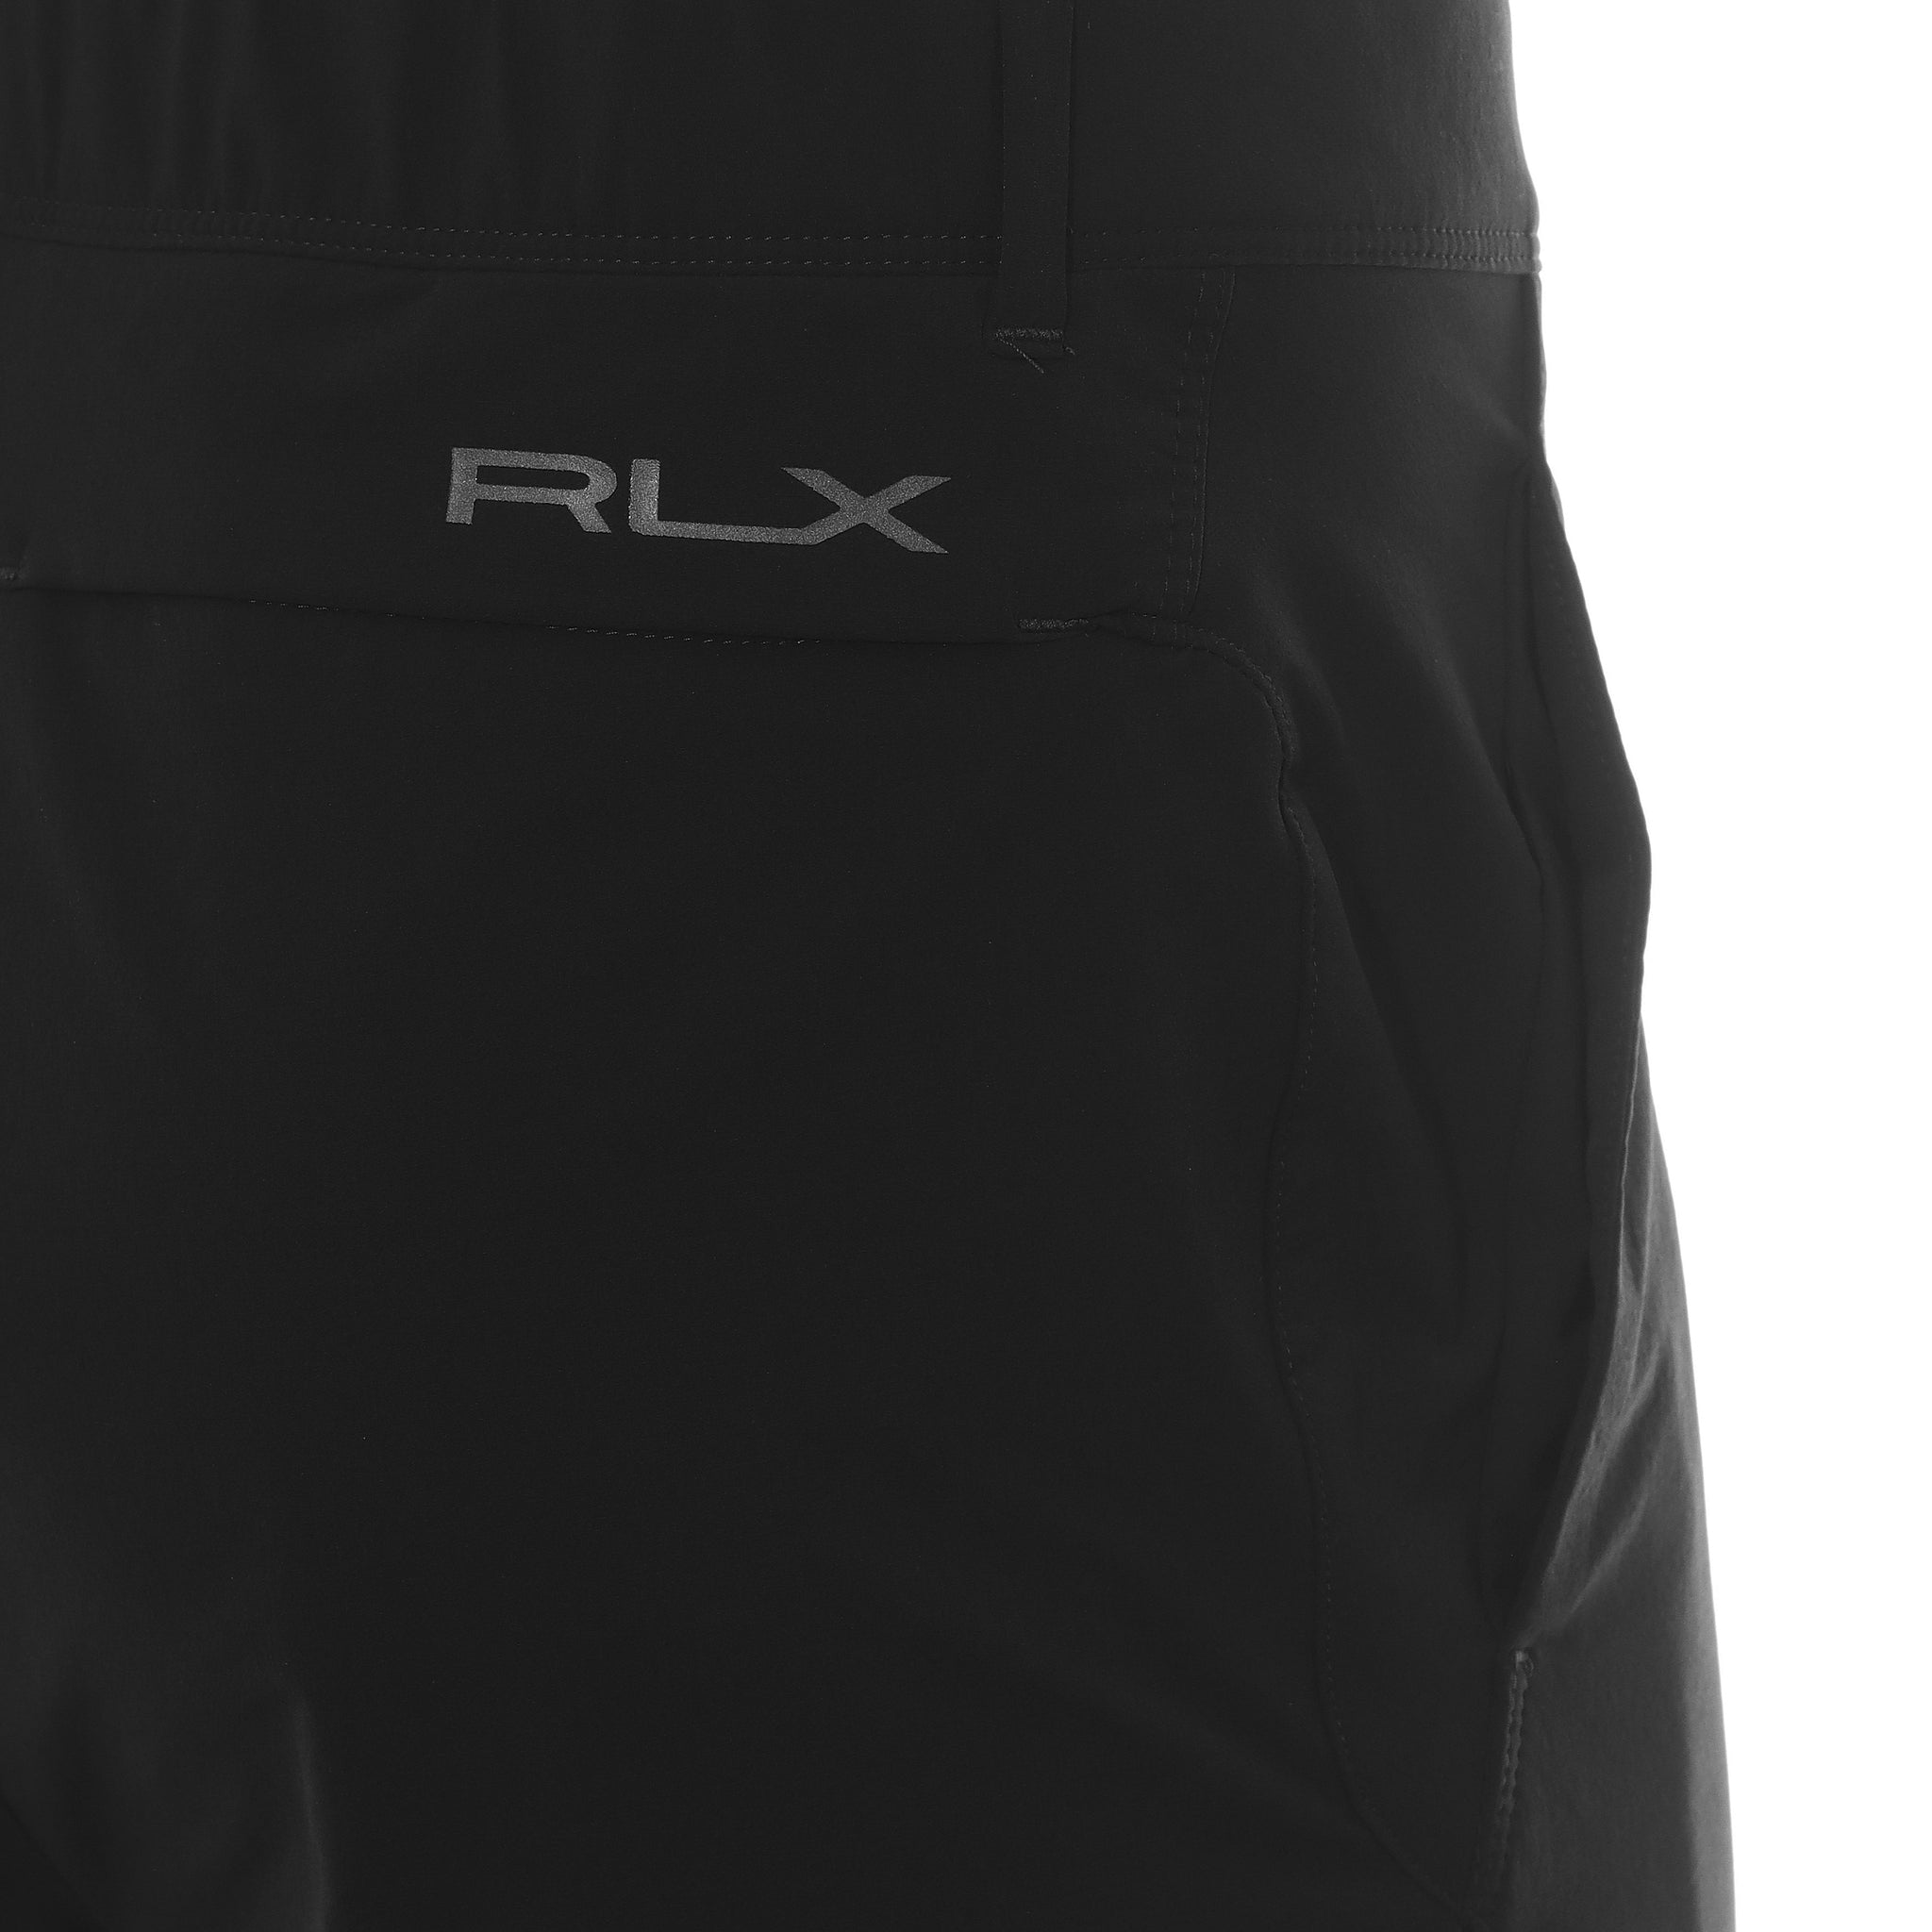 rlx-ralph-lauren-on-course-trousers-785915686-polo-black-001